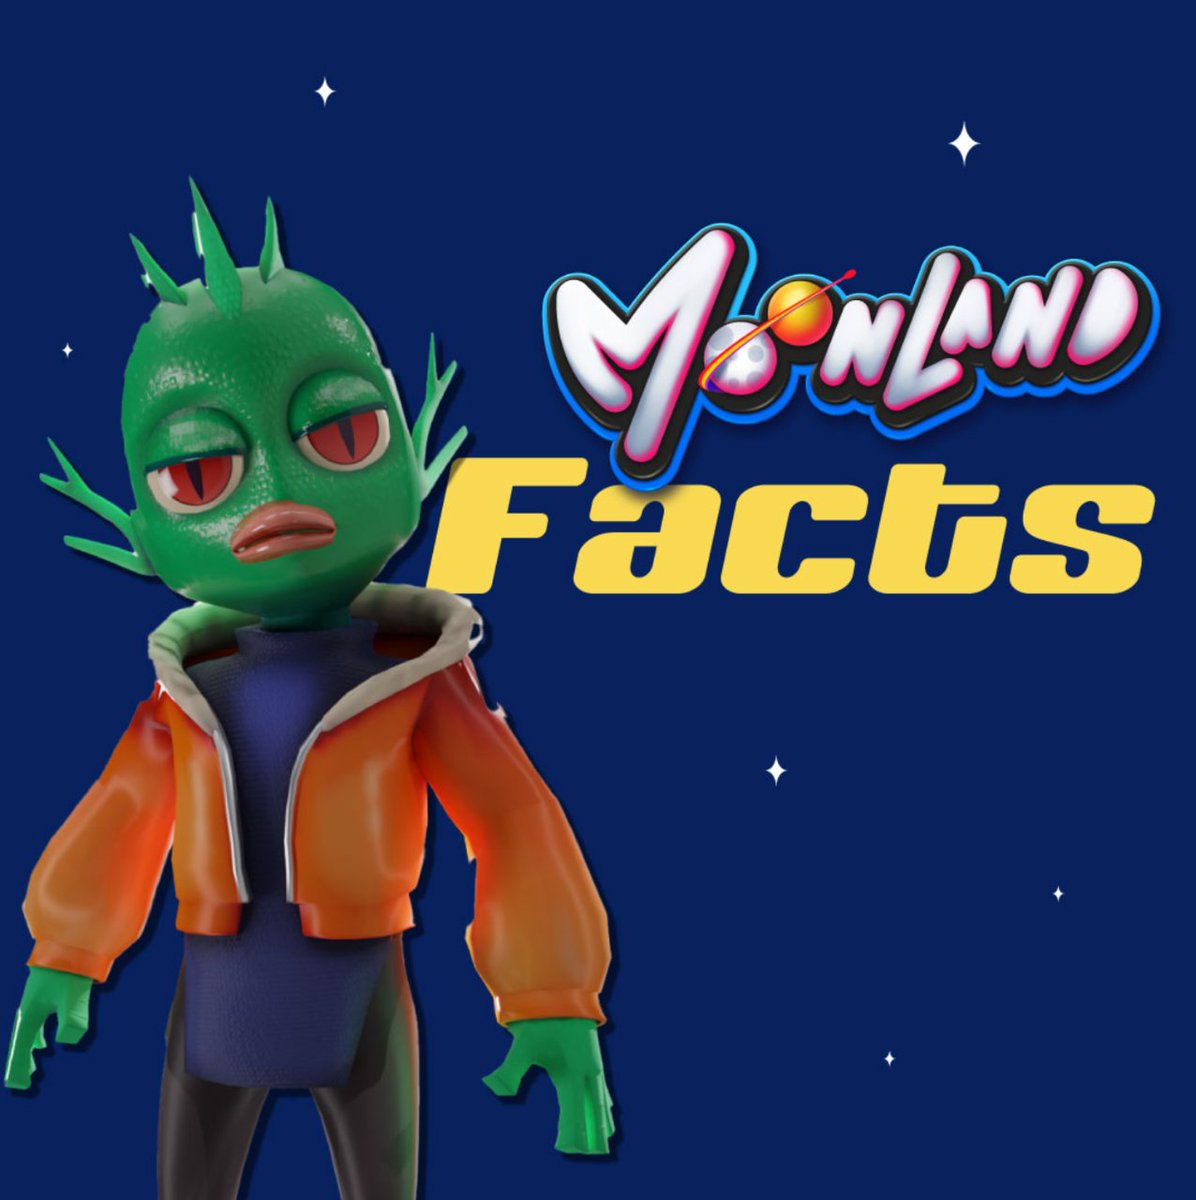 Blending MMO living economies with #Web3, #Moonland has tokenized every facet of its internal economy, creating a playground for innovation where players own real estate and conduct transactions using Web3 Technology. Join the future in the #metaverse🔥 #cryptogame #cryptogaming